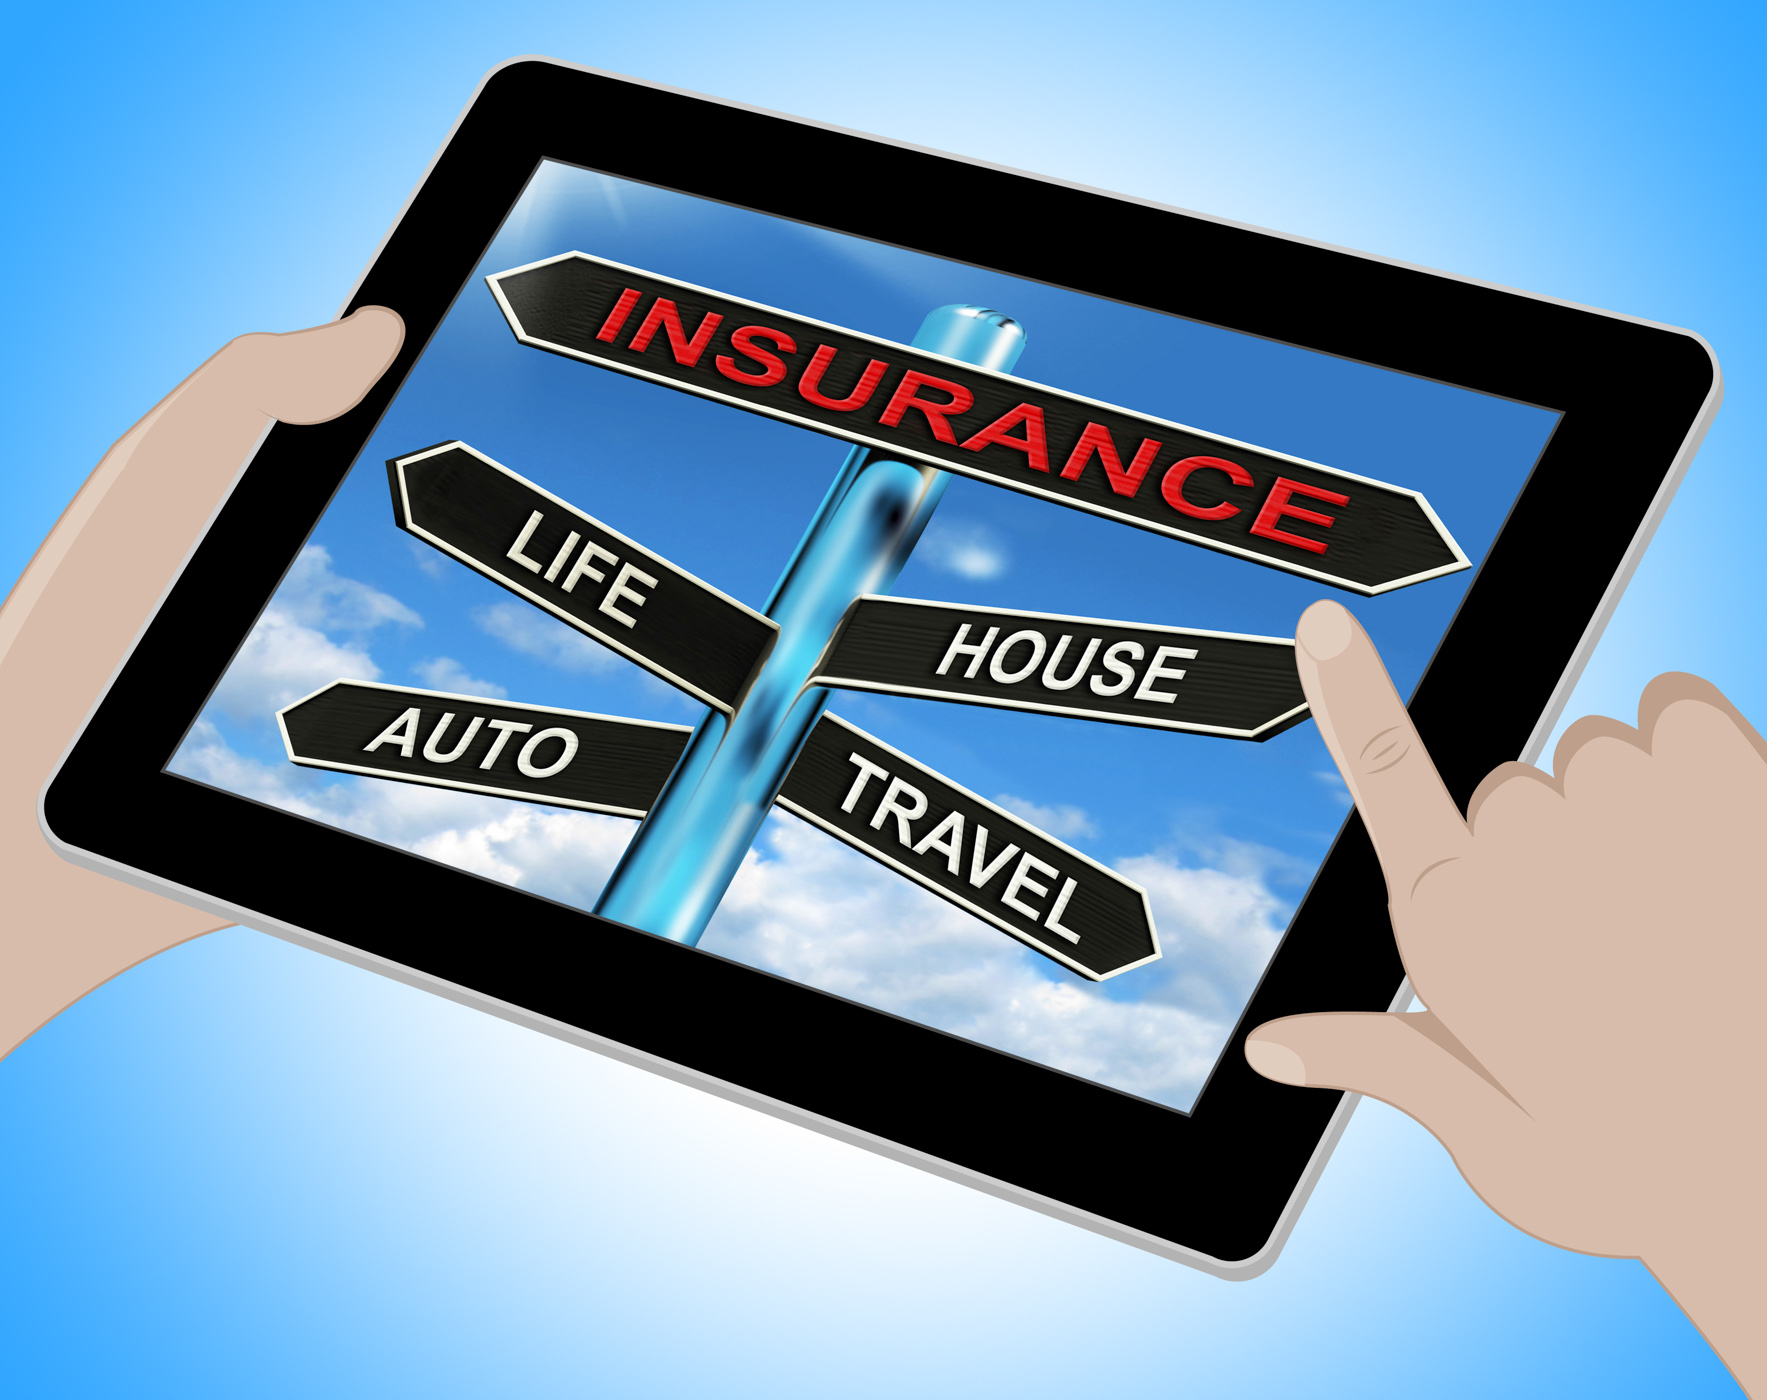 Insurance tablet means life house auto and travel photo